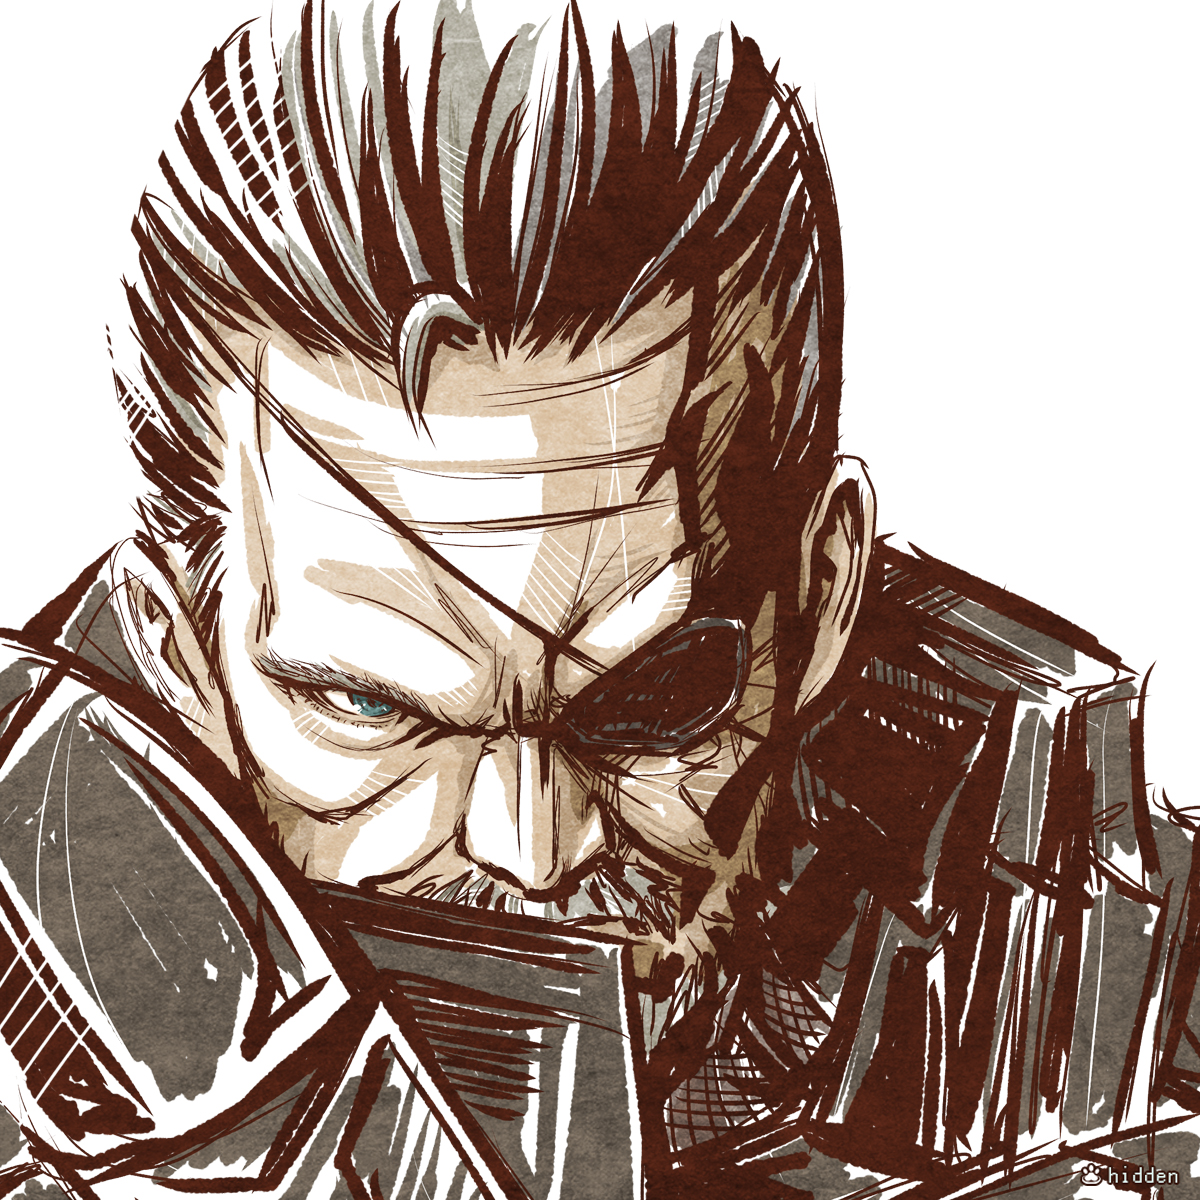 「METAL GEAR SOLID 2ソリダス・スネーク今日は何日だ?#MGS #」|𝒉𝒊𝒅𝒅𝒆𝒏のイラスト